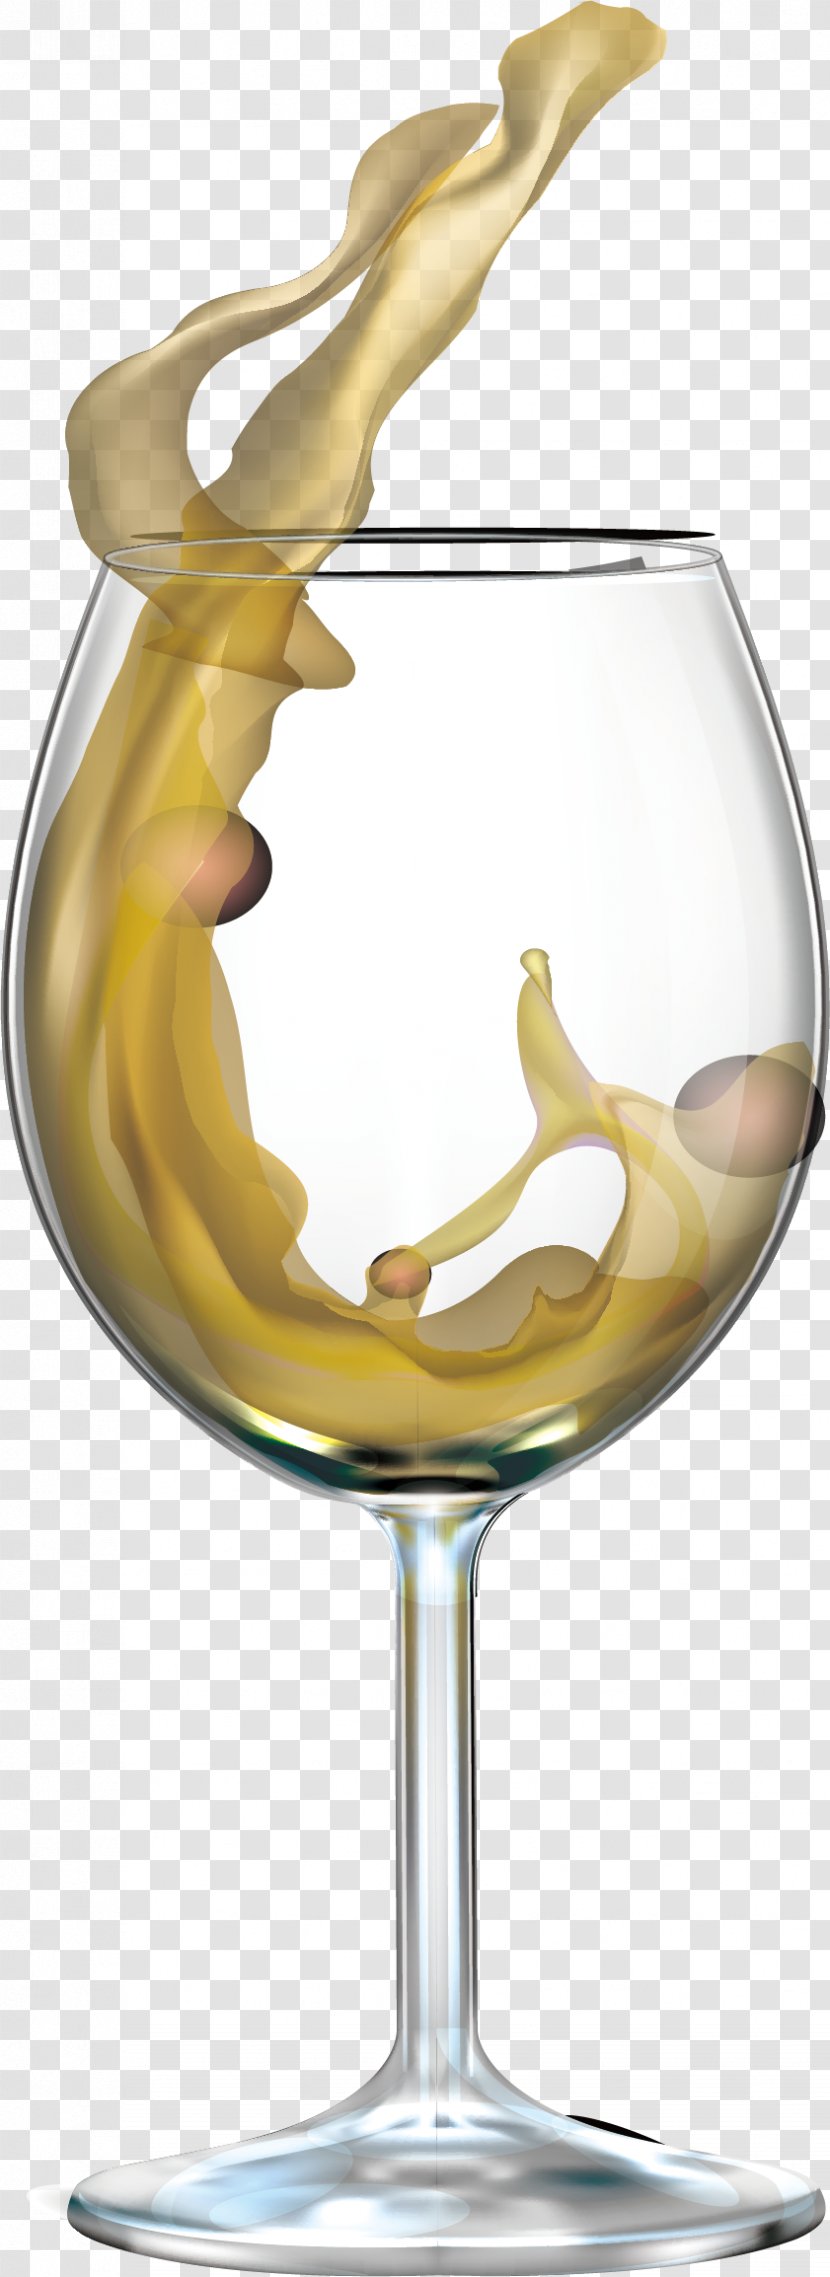 Wine Glass Transparency And Translucency - Champagne Stemware - Transparent Transparent PNG